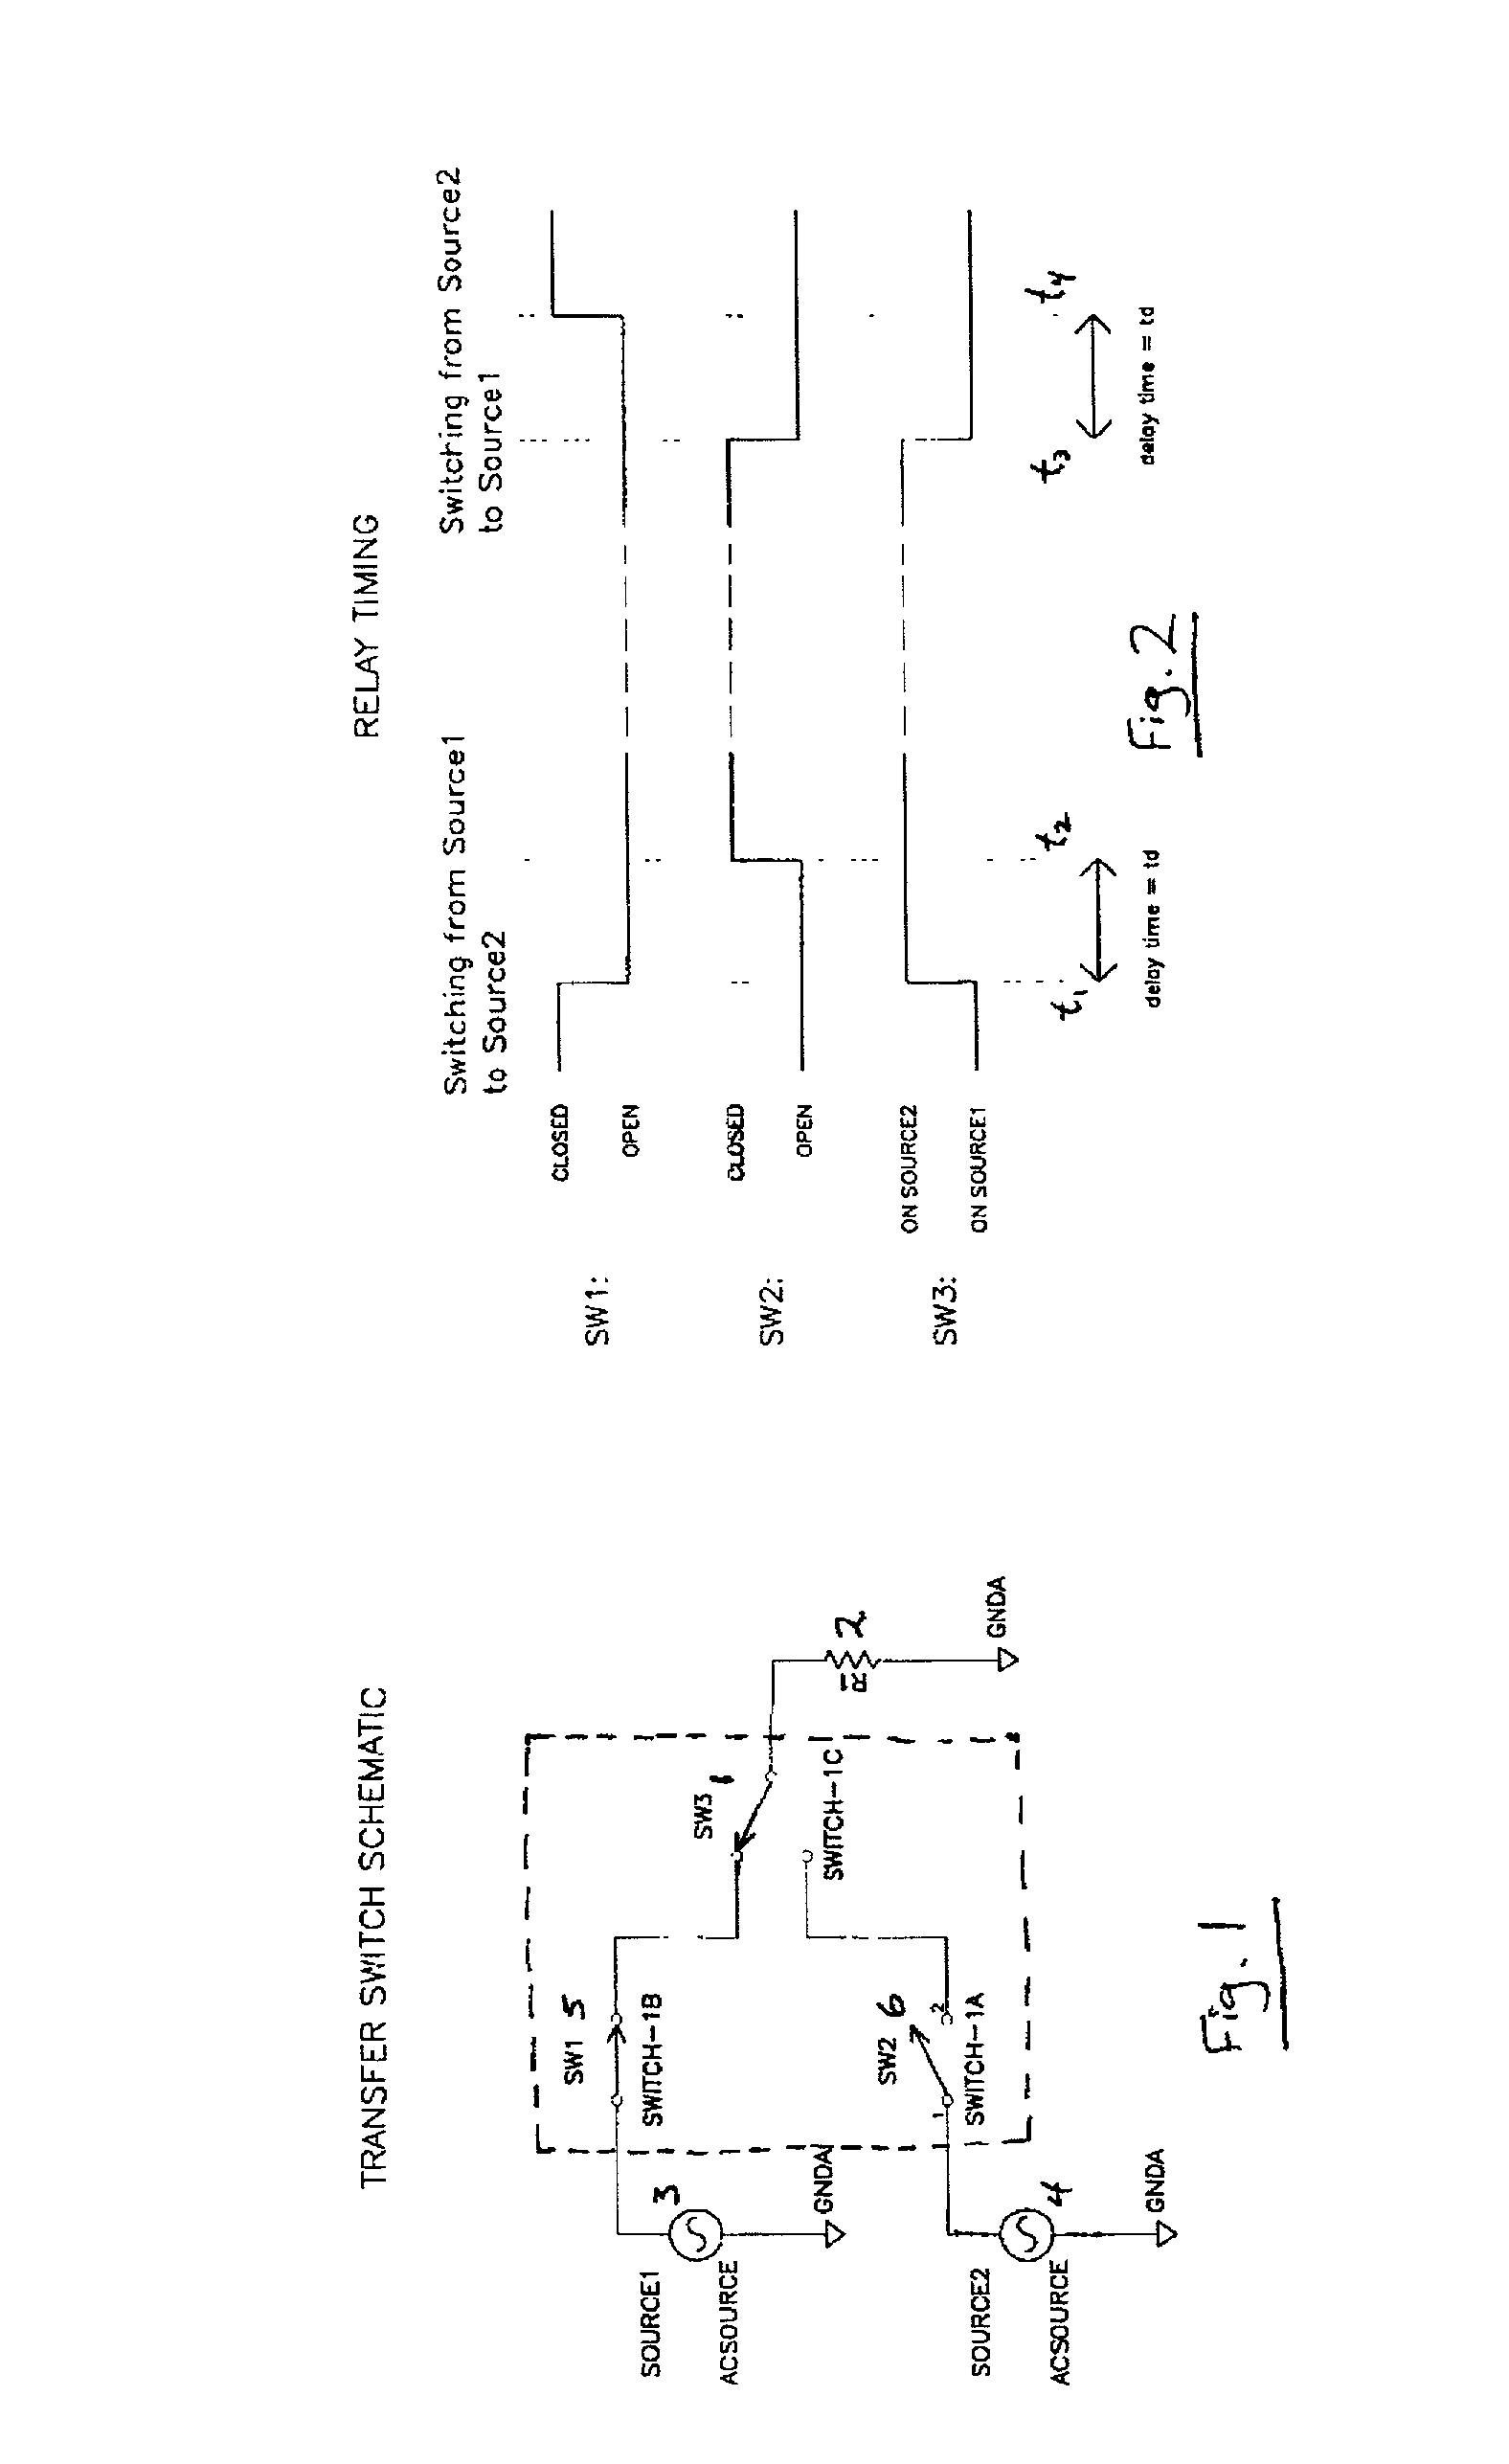 Method for apparatus for transfer control and undervoltage detection in an automatic transfer switch